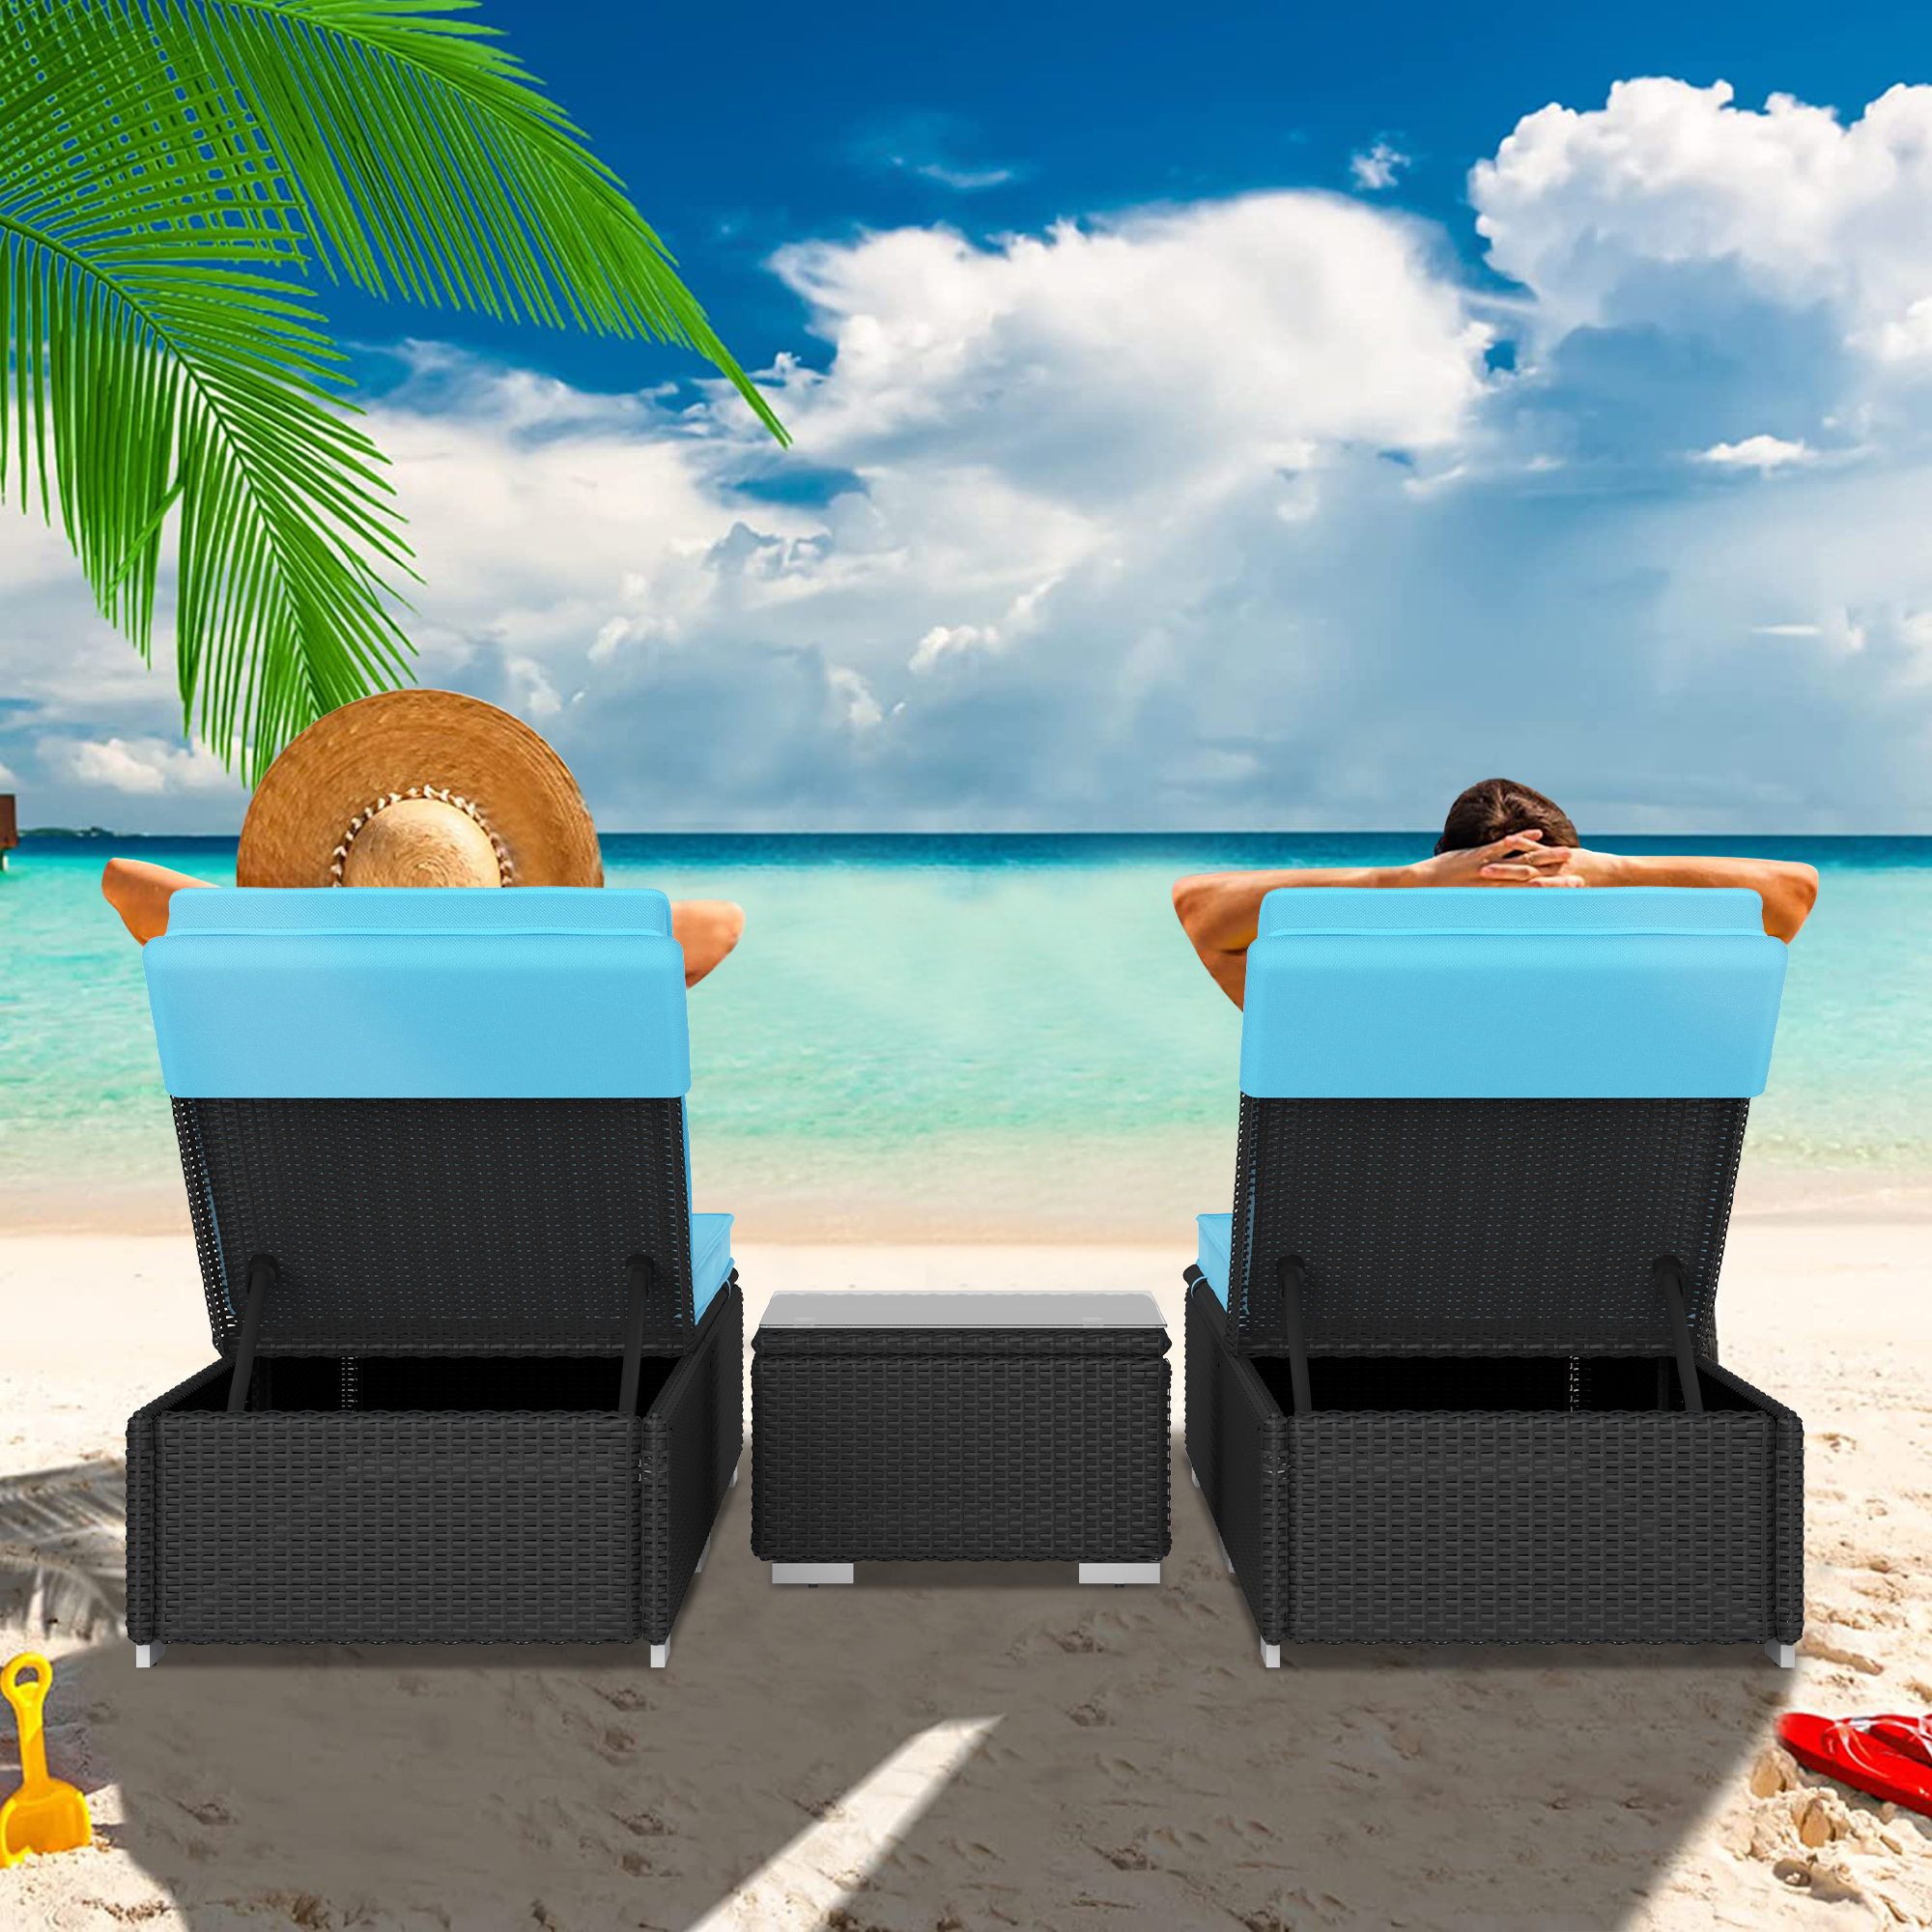 SESSLIFE 2 PCS Lounge Chair for Outside, Adjustable 5 Position Rattan Wicker Outdoor Chaise Lounge with Head Pillow & Thickened Cushion for Poolside, Patio, Garden, Deck (2, Light Blue) - image 3 of 8